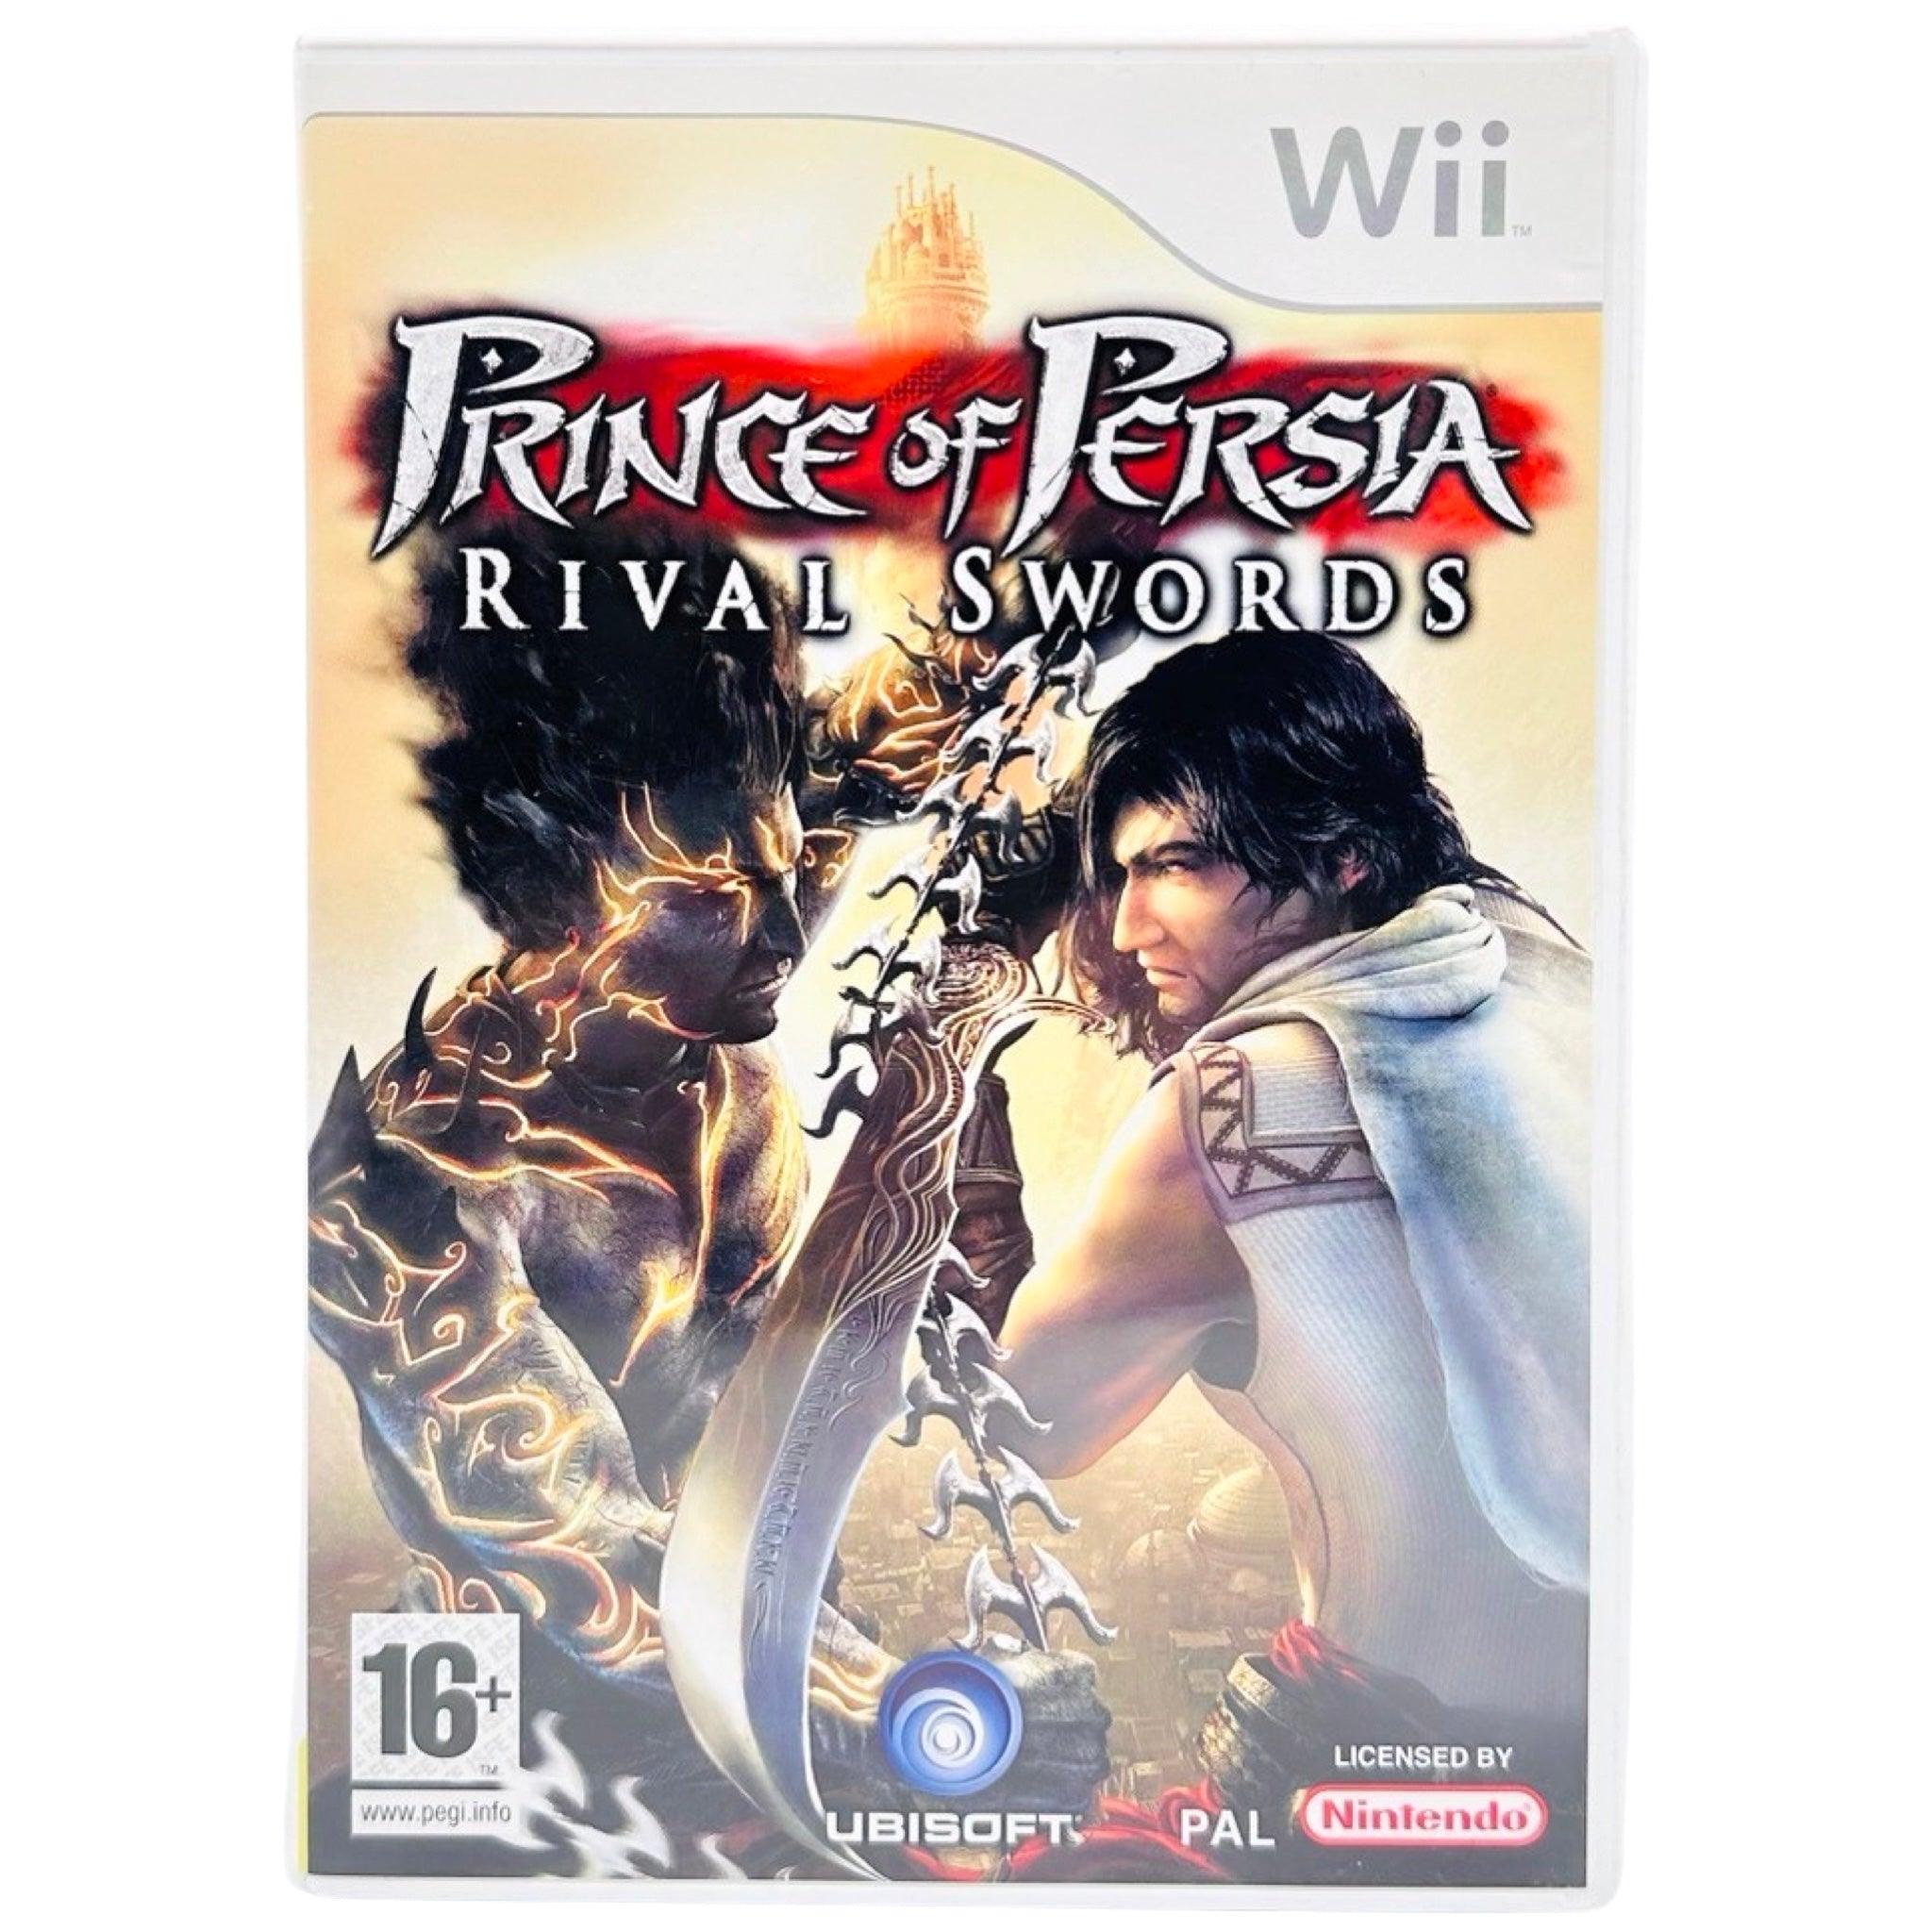 Wii: Prince Of Persia Rival Swords - RetroGaming.no